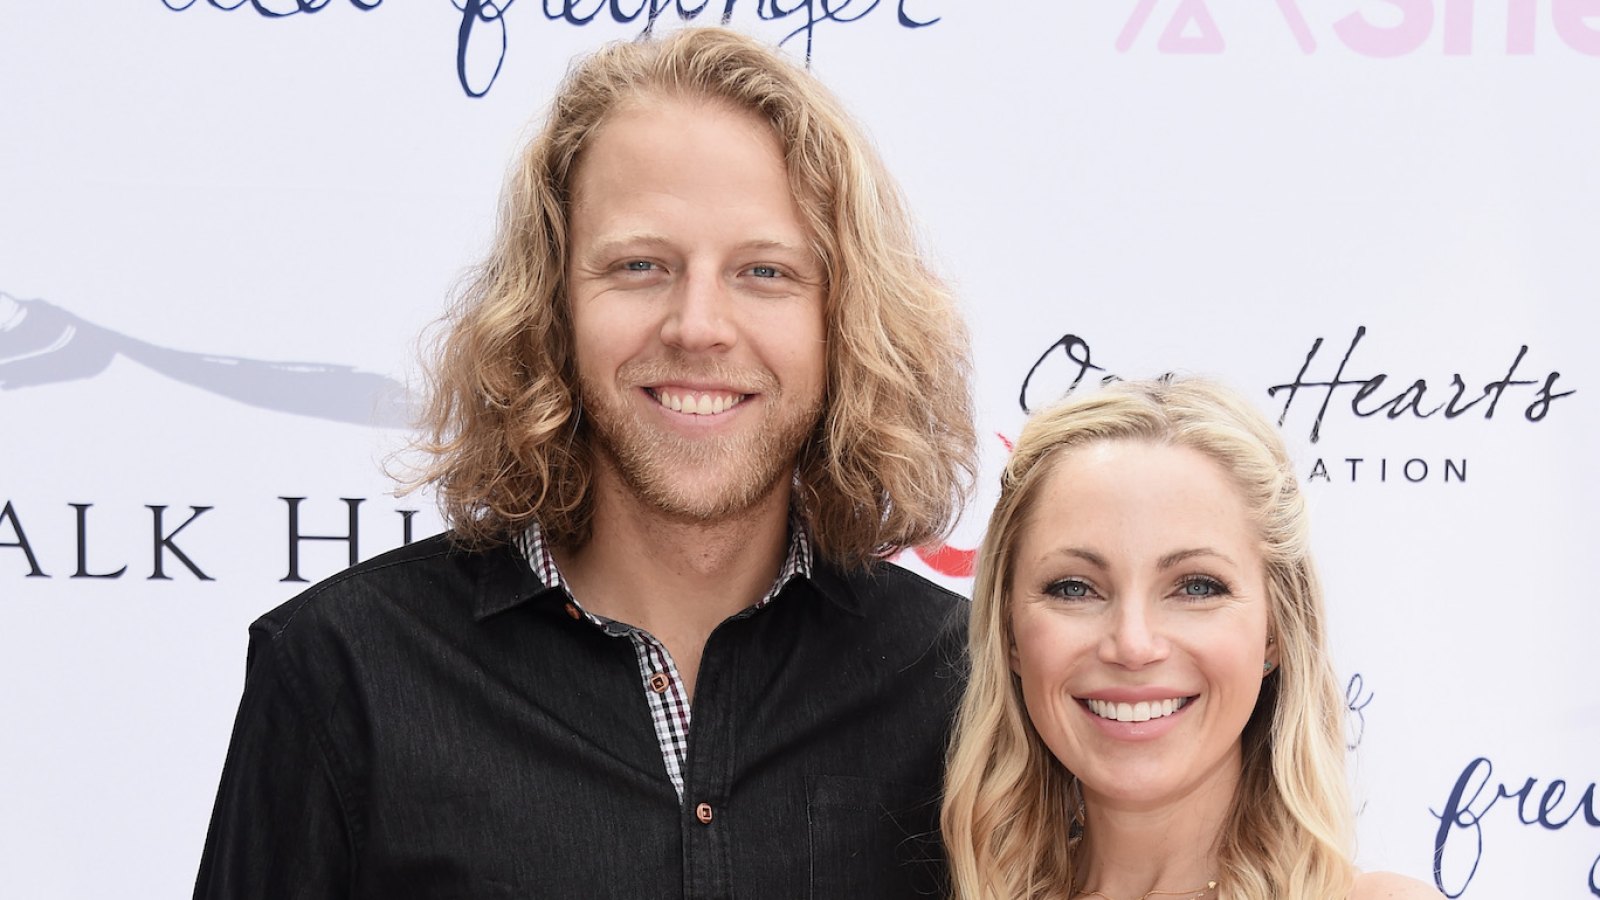 Bachelor-s Sarah Herron Is Pregnant With Baby No. 2 After Losing Son